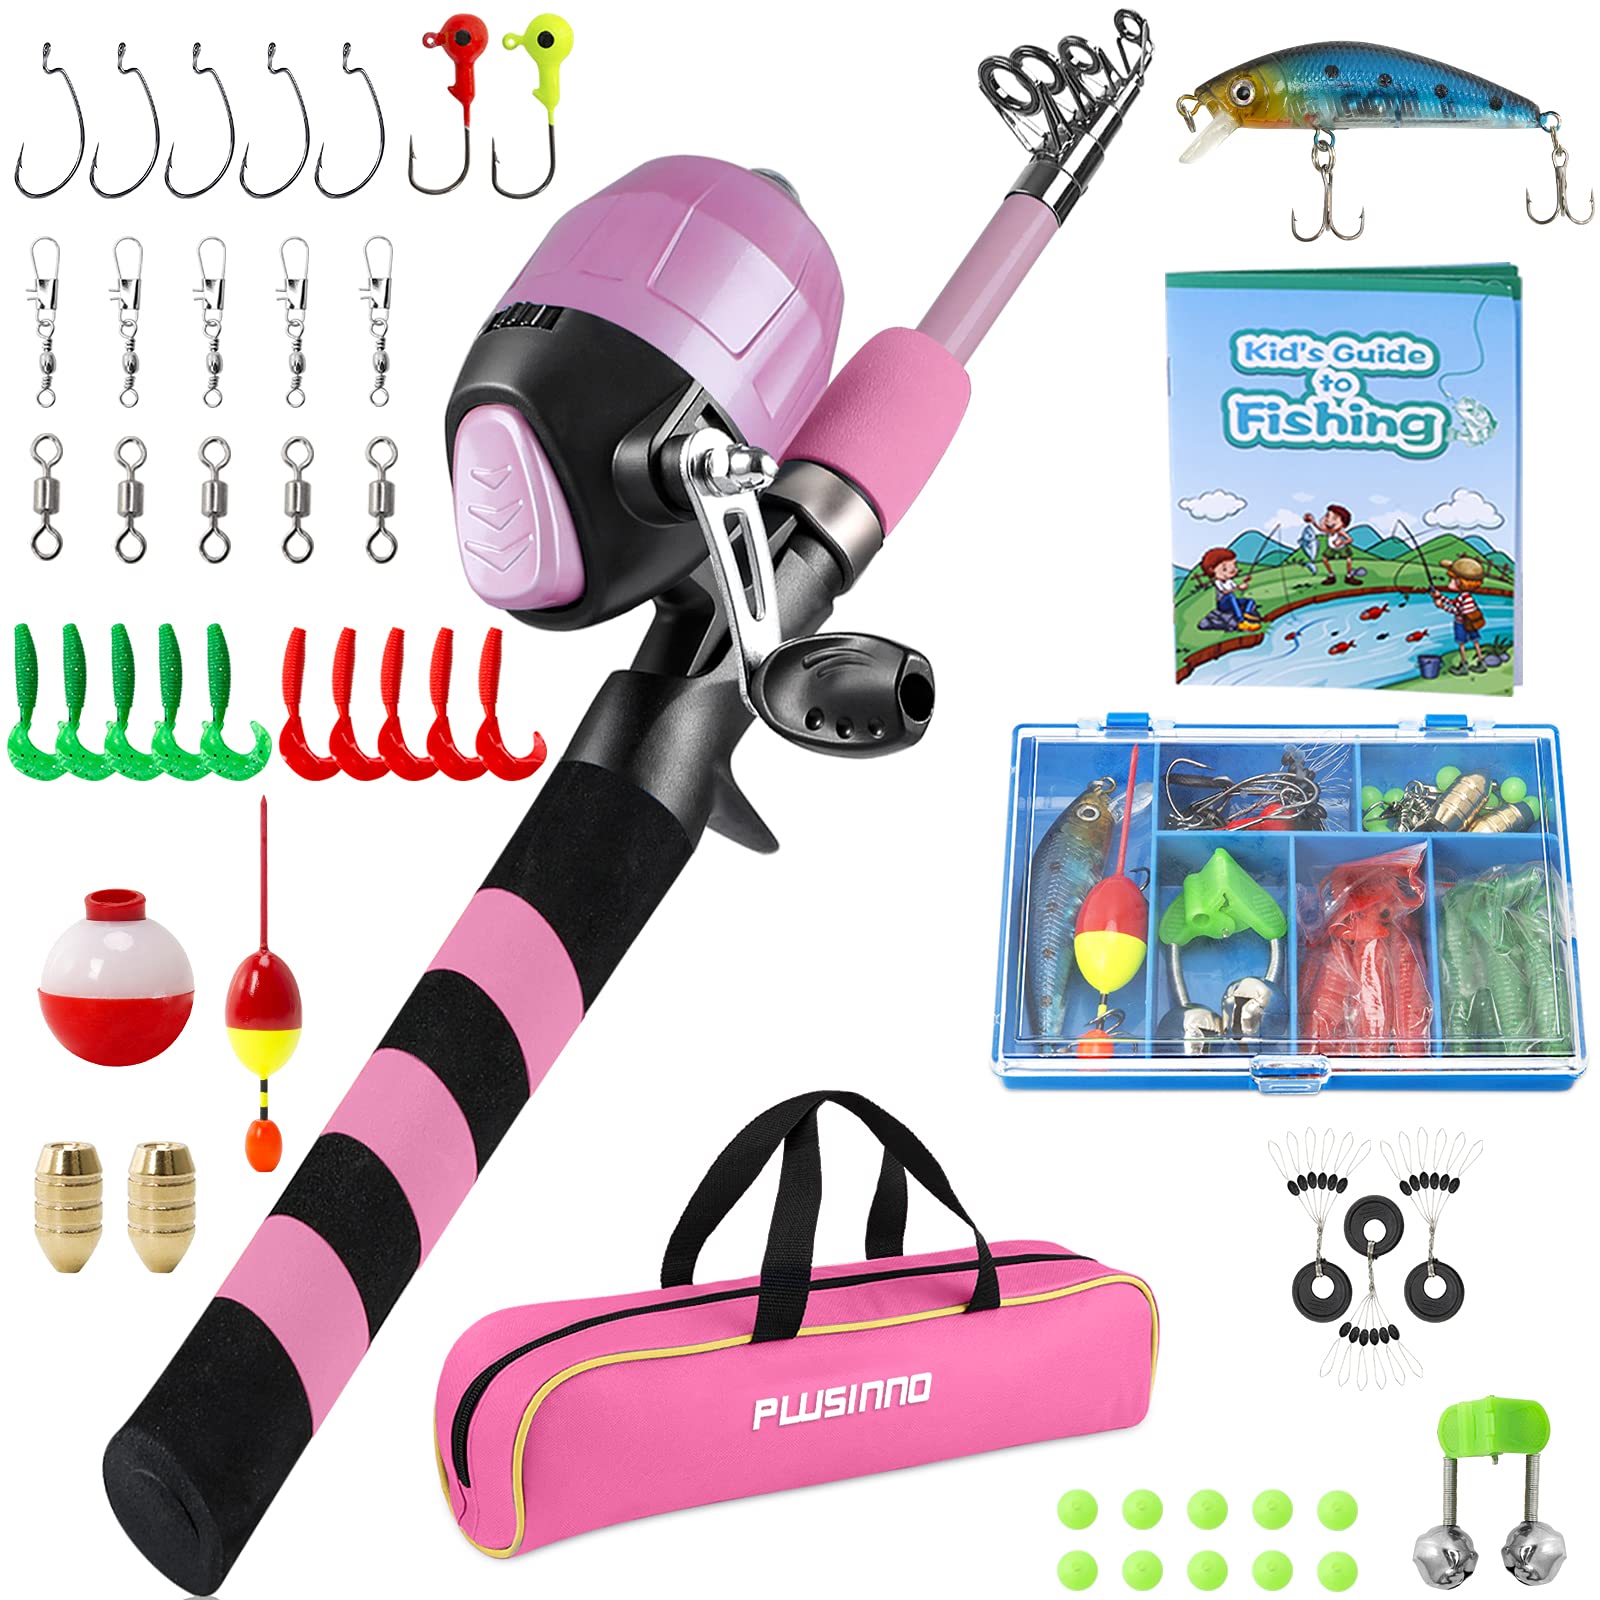 Gonex Kids Fishing Pole, Portable Telescopic Fishing Rod and Reel Combos  Full Fish Tackle Kit with Fishing Line, Fishing Gears for Boys, Girls,  Beginner or Youth 